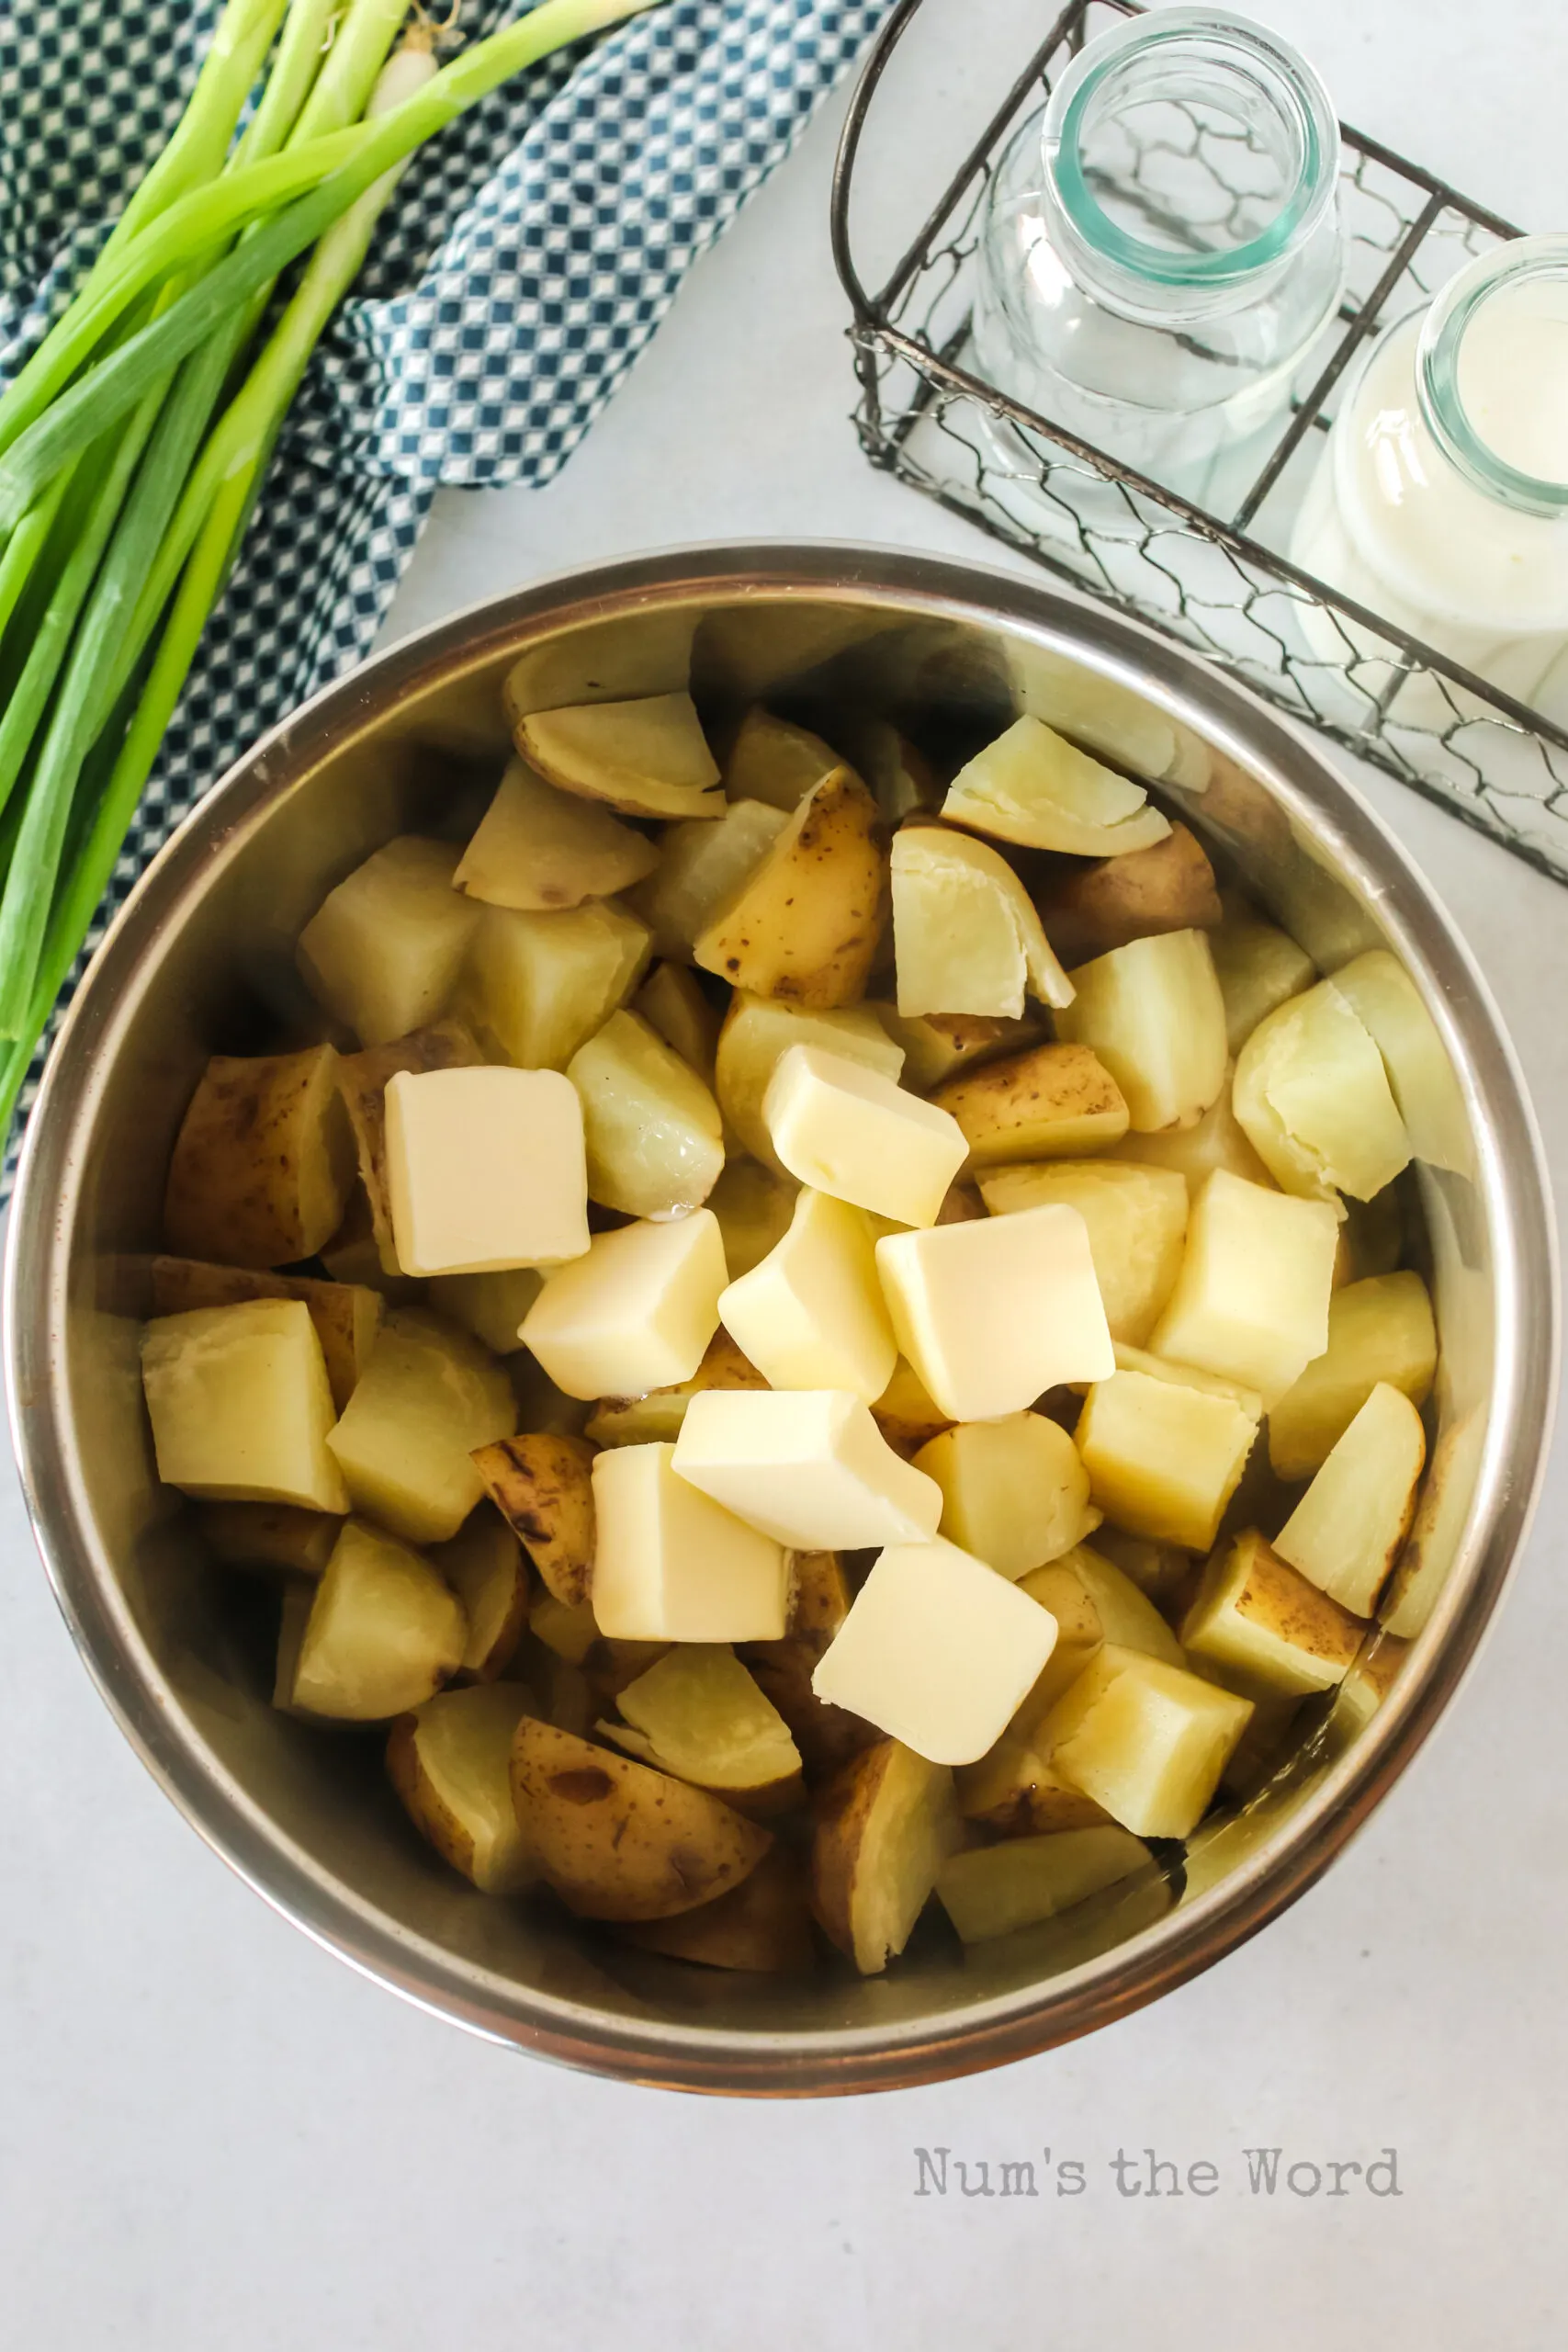 Butter added to cooked potato cubes